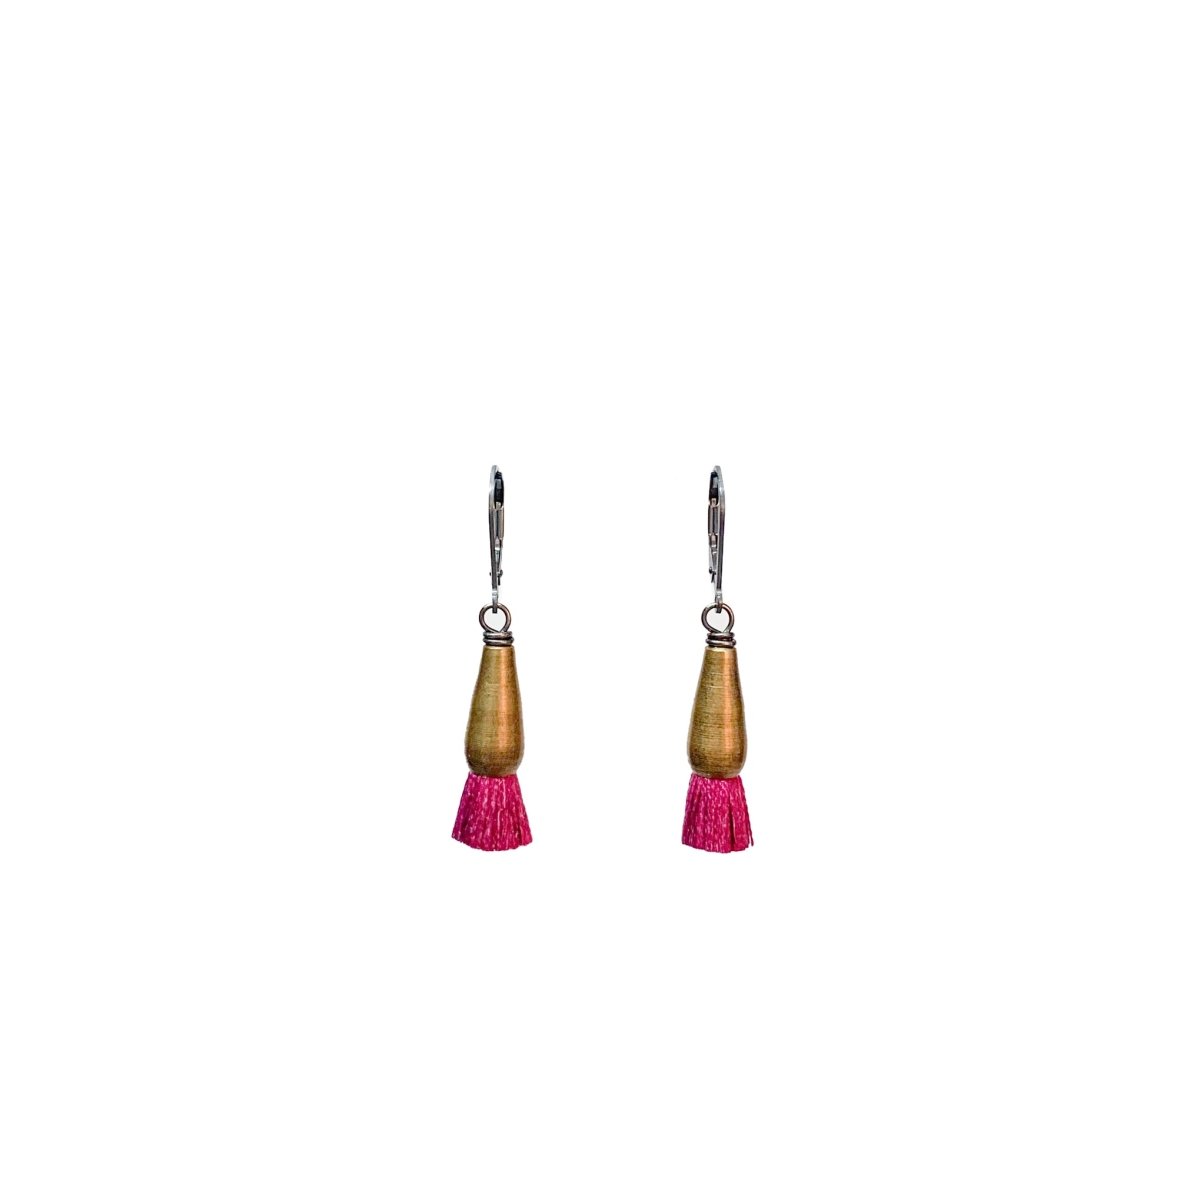 A pair of brass earrings finished with hot pink silk tassels. The Bud Earrings in Fuchsia are from designer Emily Bixler of BOET.